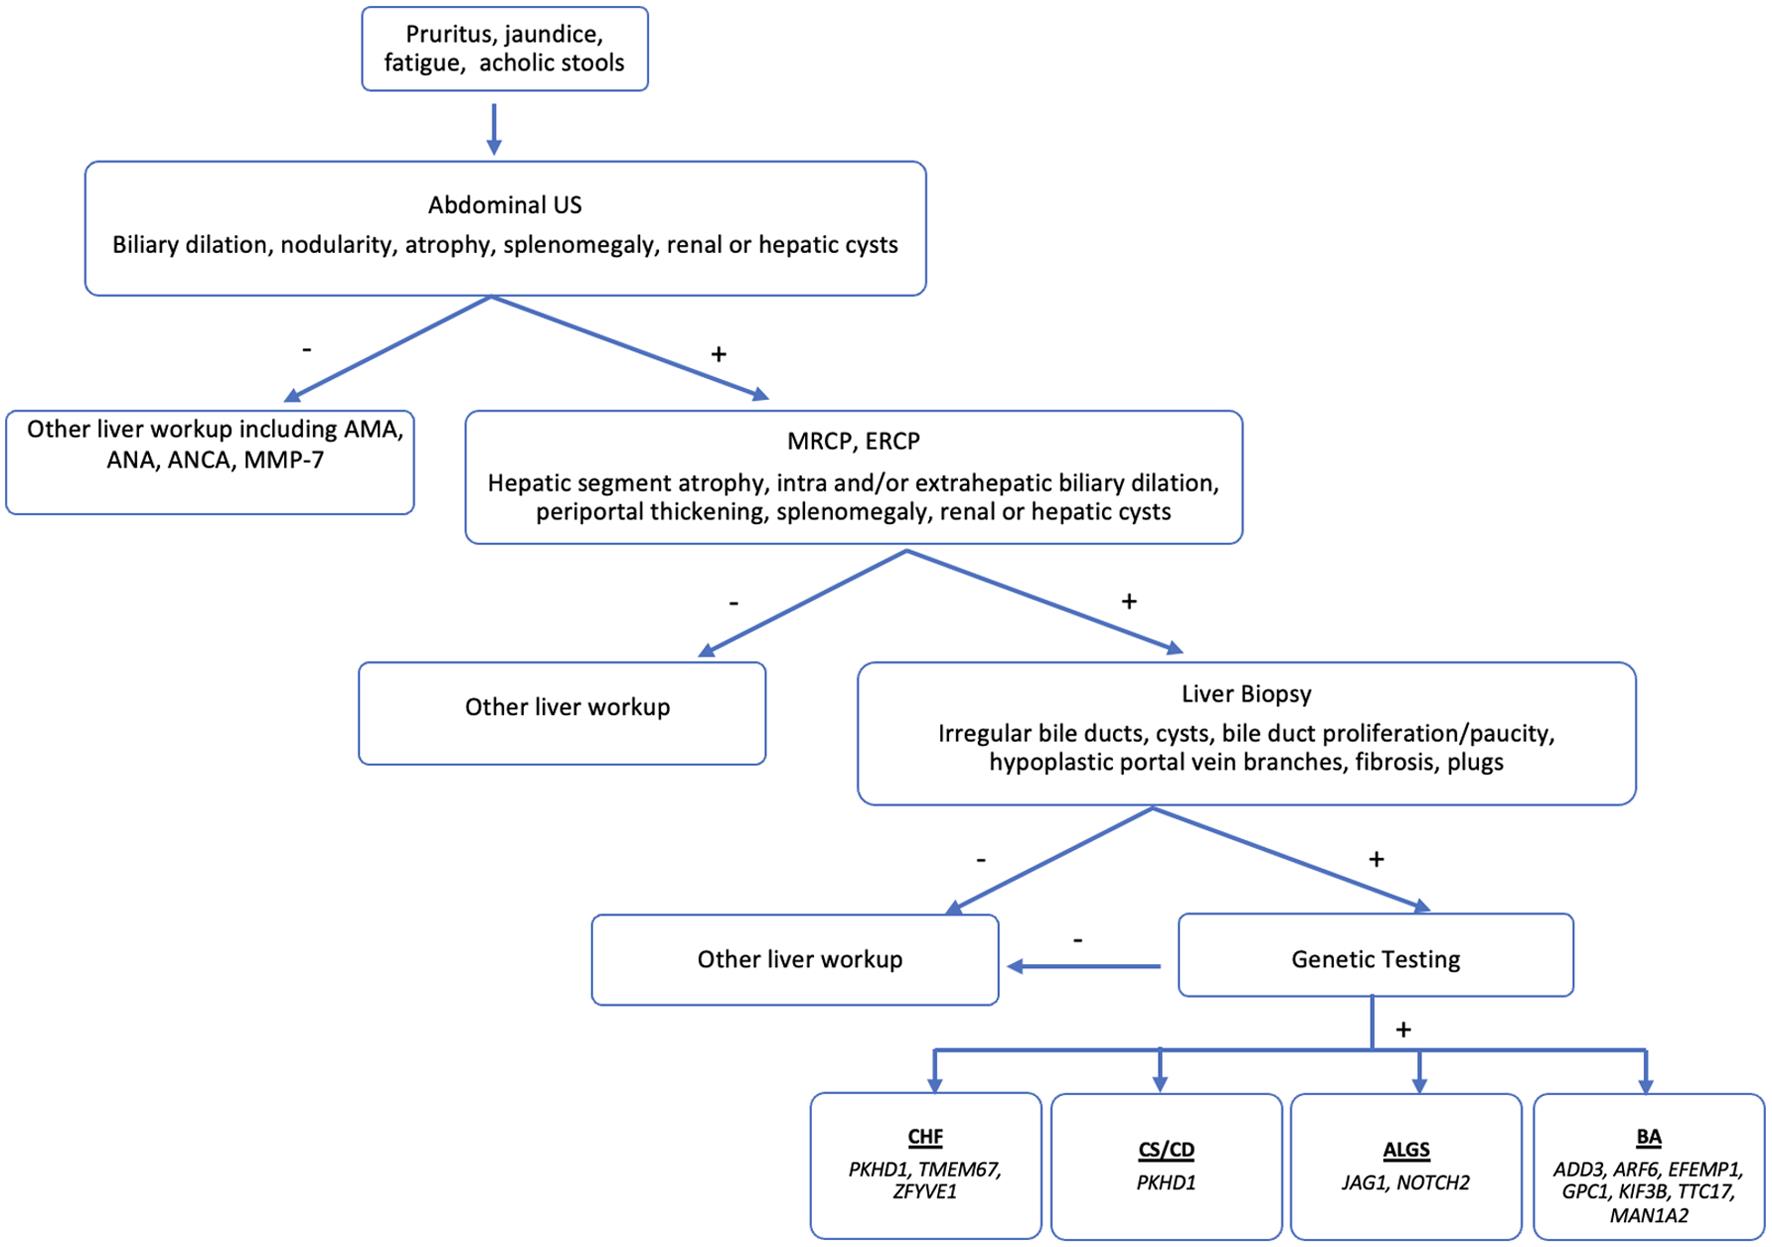 An algorithm for the evaluation of chronic cholestatic liver disease.